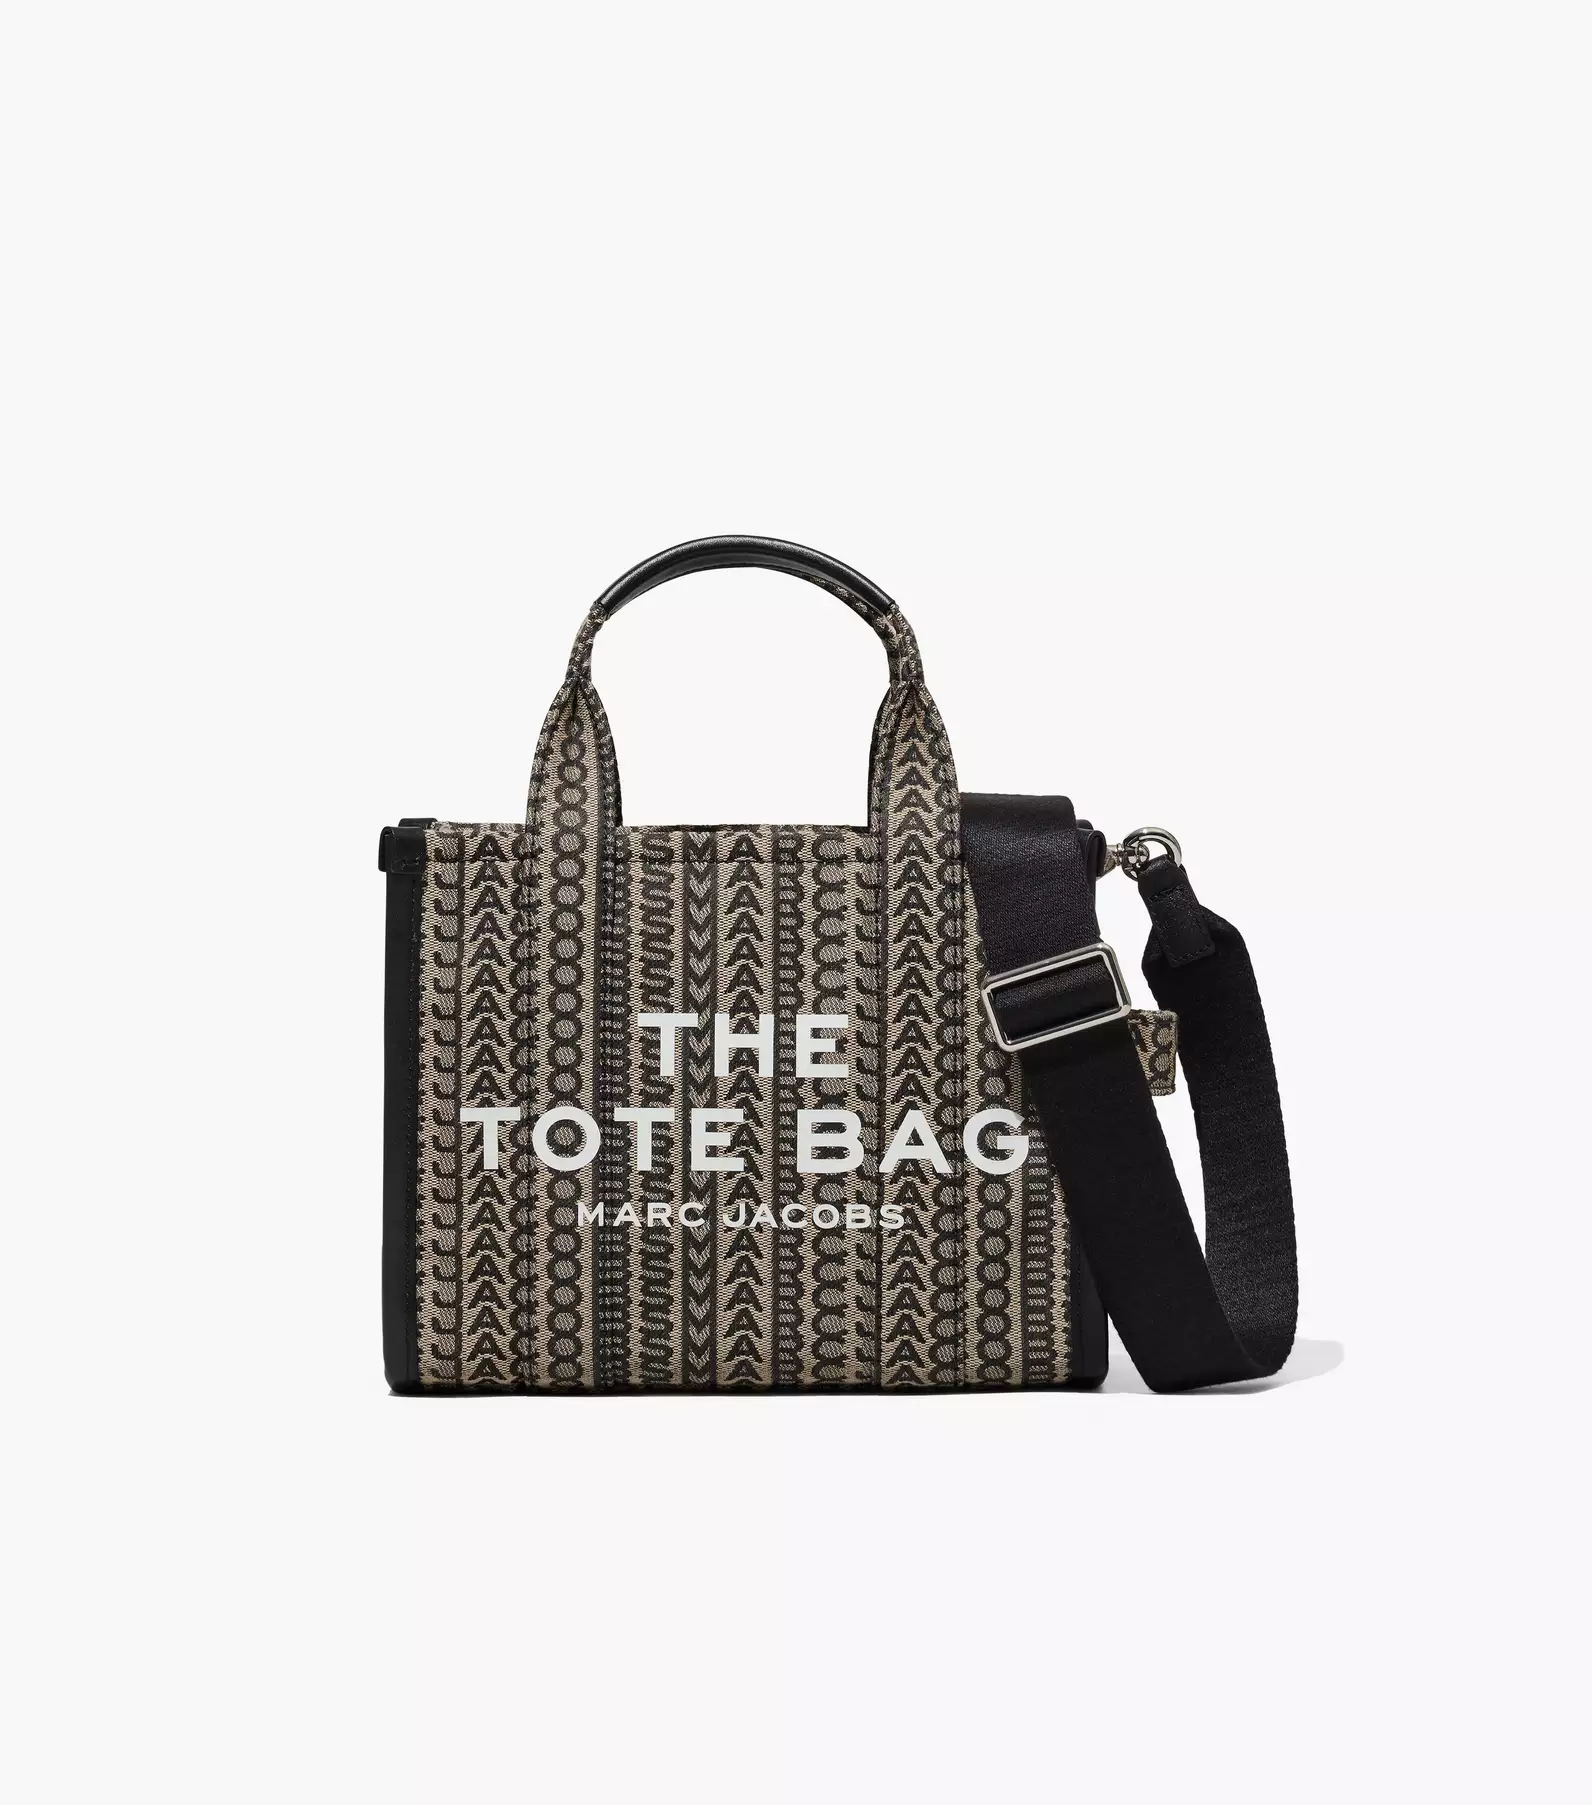 Marc Jacobs The Marc Jacobs Small The Tote Bag